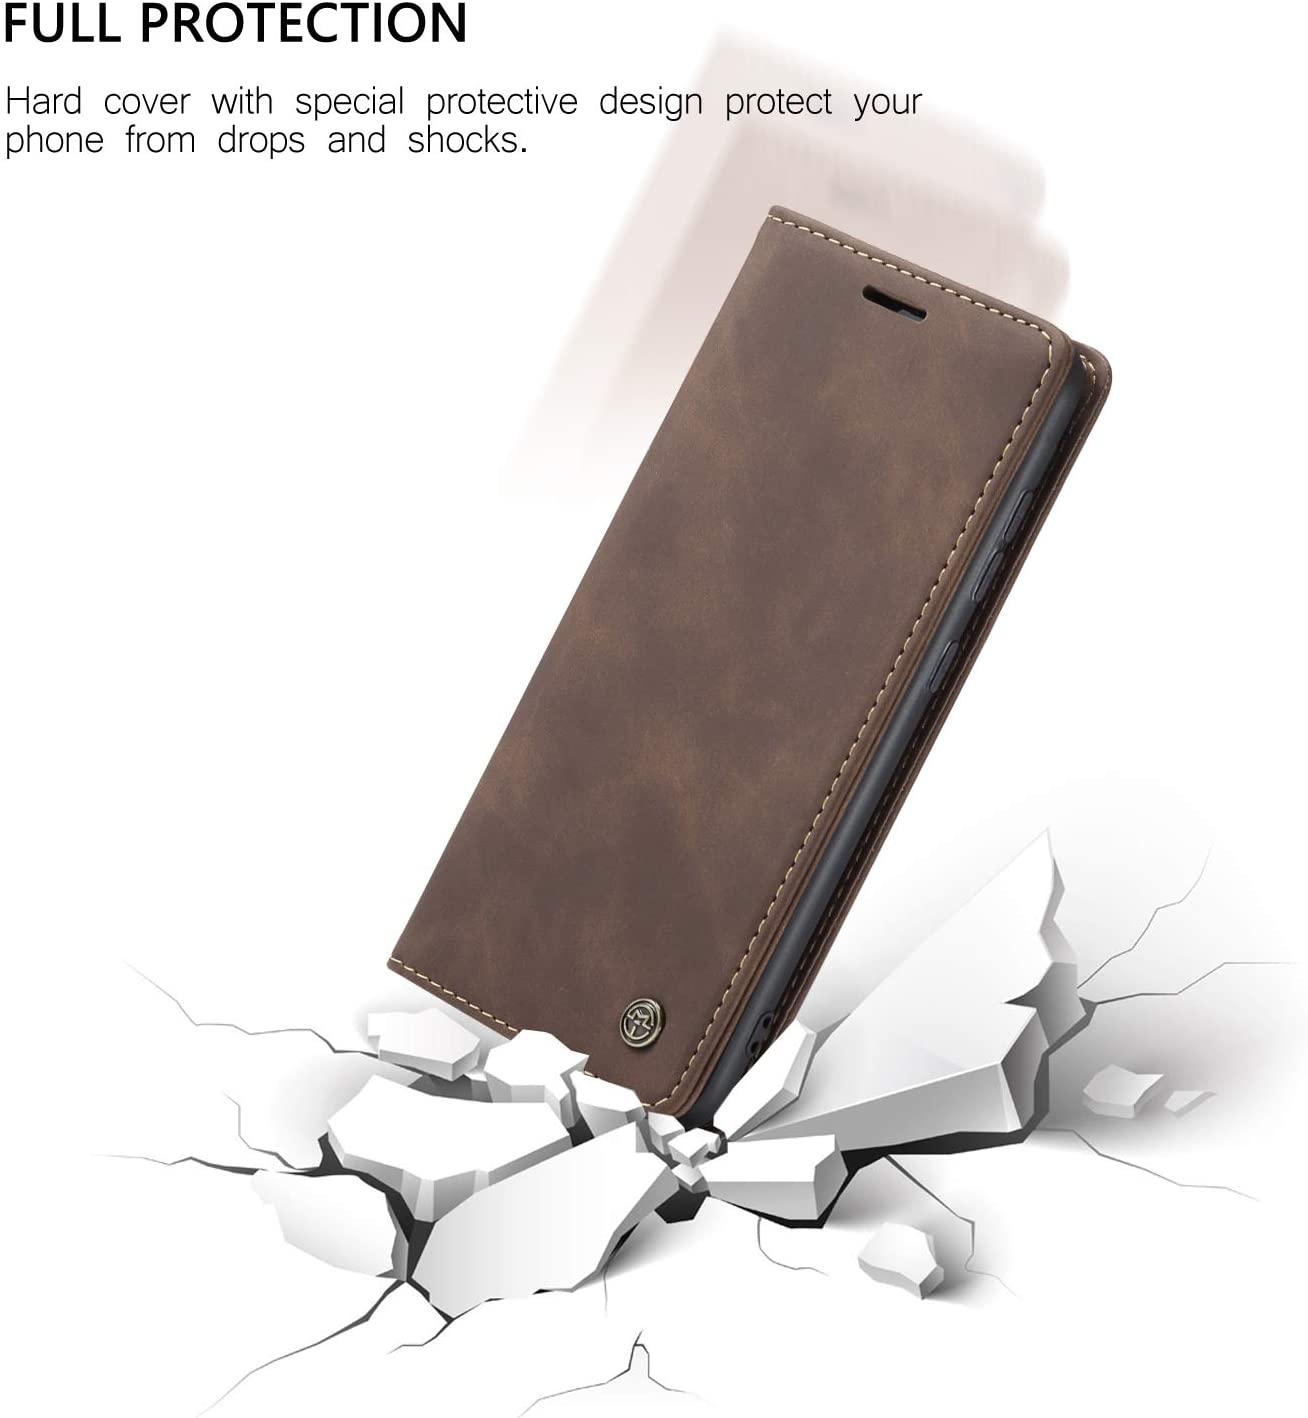 Samsung Galaxy S20 Plus full body protection Leather Wallet flip case cover by Excelsior